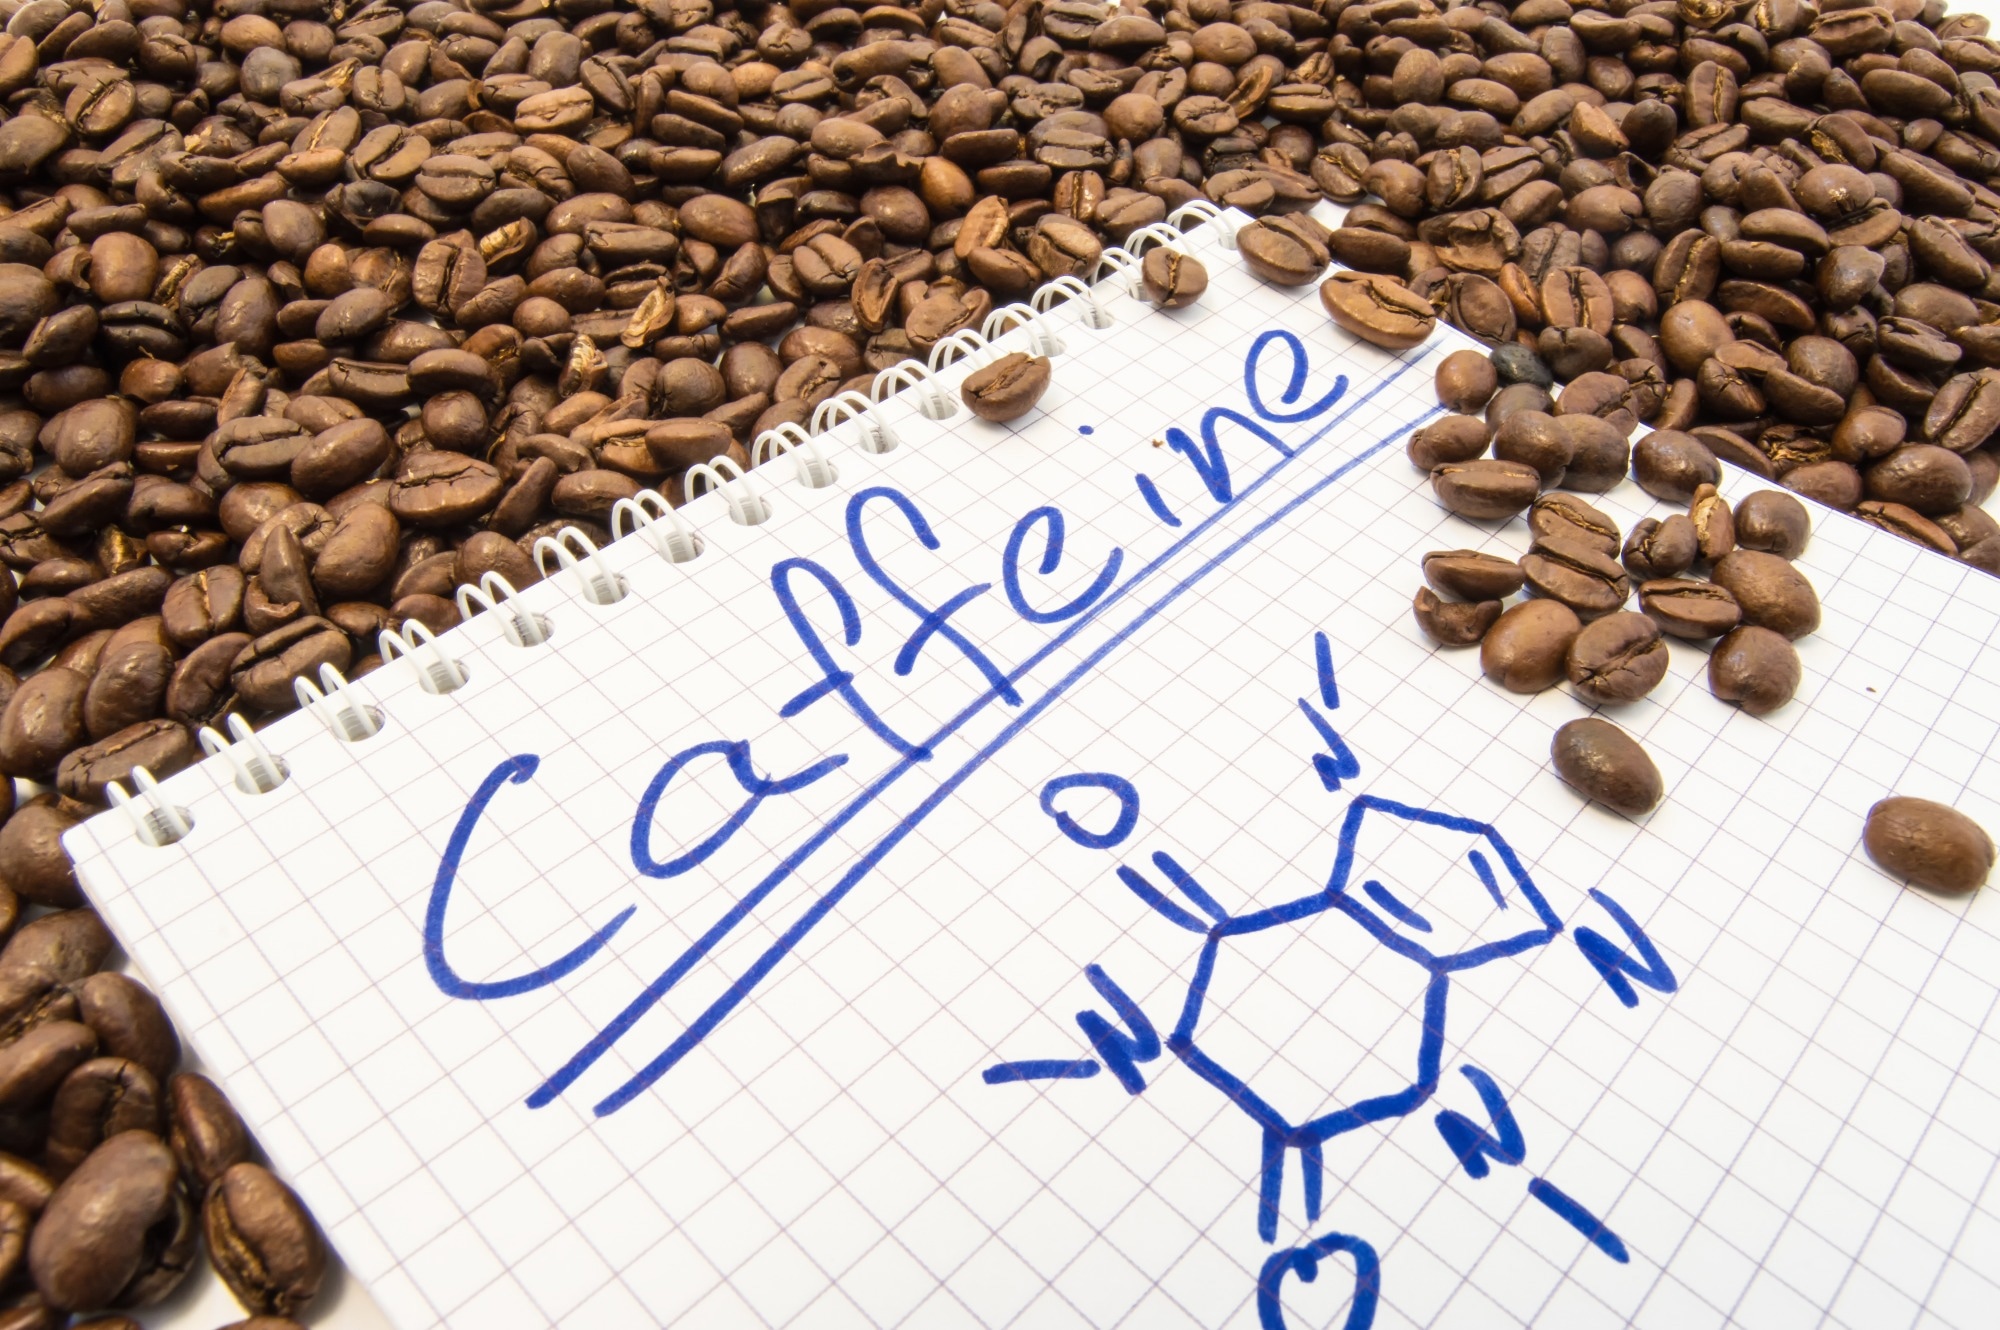 High plasma caffeine levels may reduce body fat and type 2 diabetes risk